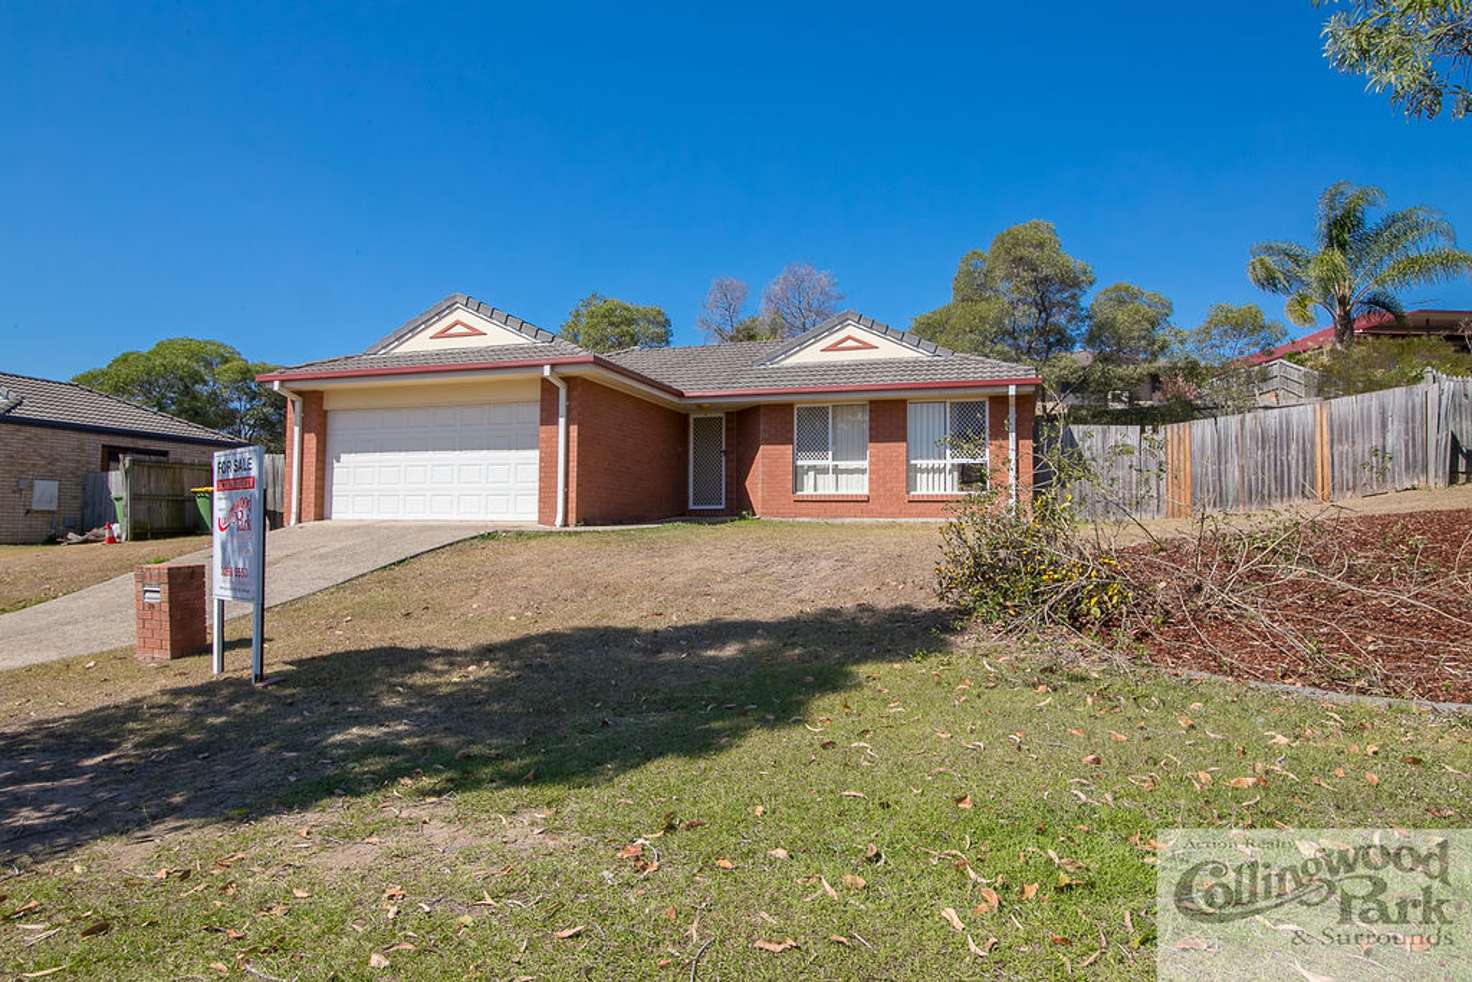 Main view of Homely house listing, 30 BASSILI DRIVE, Collingwood Park QLD 4301